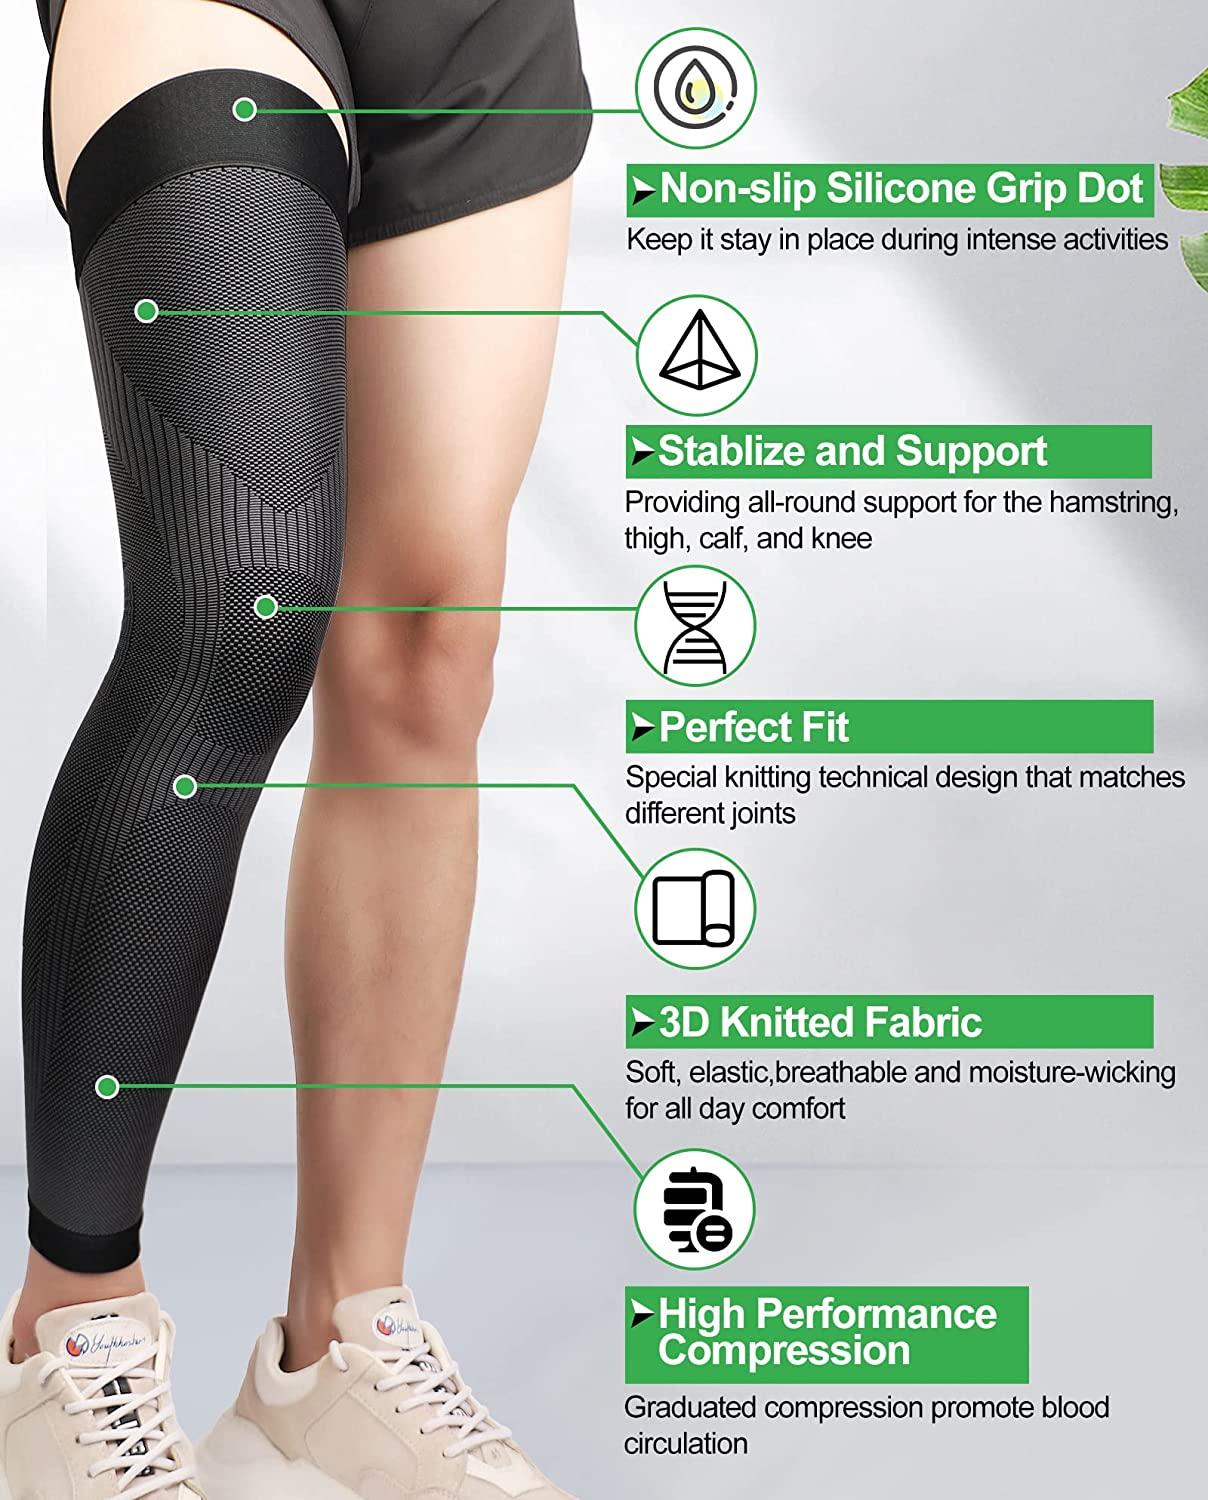 KEKING Full Leg Compression Sleeves, Unisex, Thigh High Compression Stocking  20-30mmHg Graduated Support for Thigh Calf Knee, Running, Basketball,  Reduce Varicose Veins and Swelling, 1 Pair, Black M Medium Black